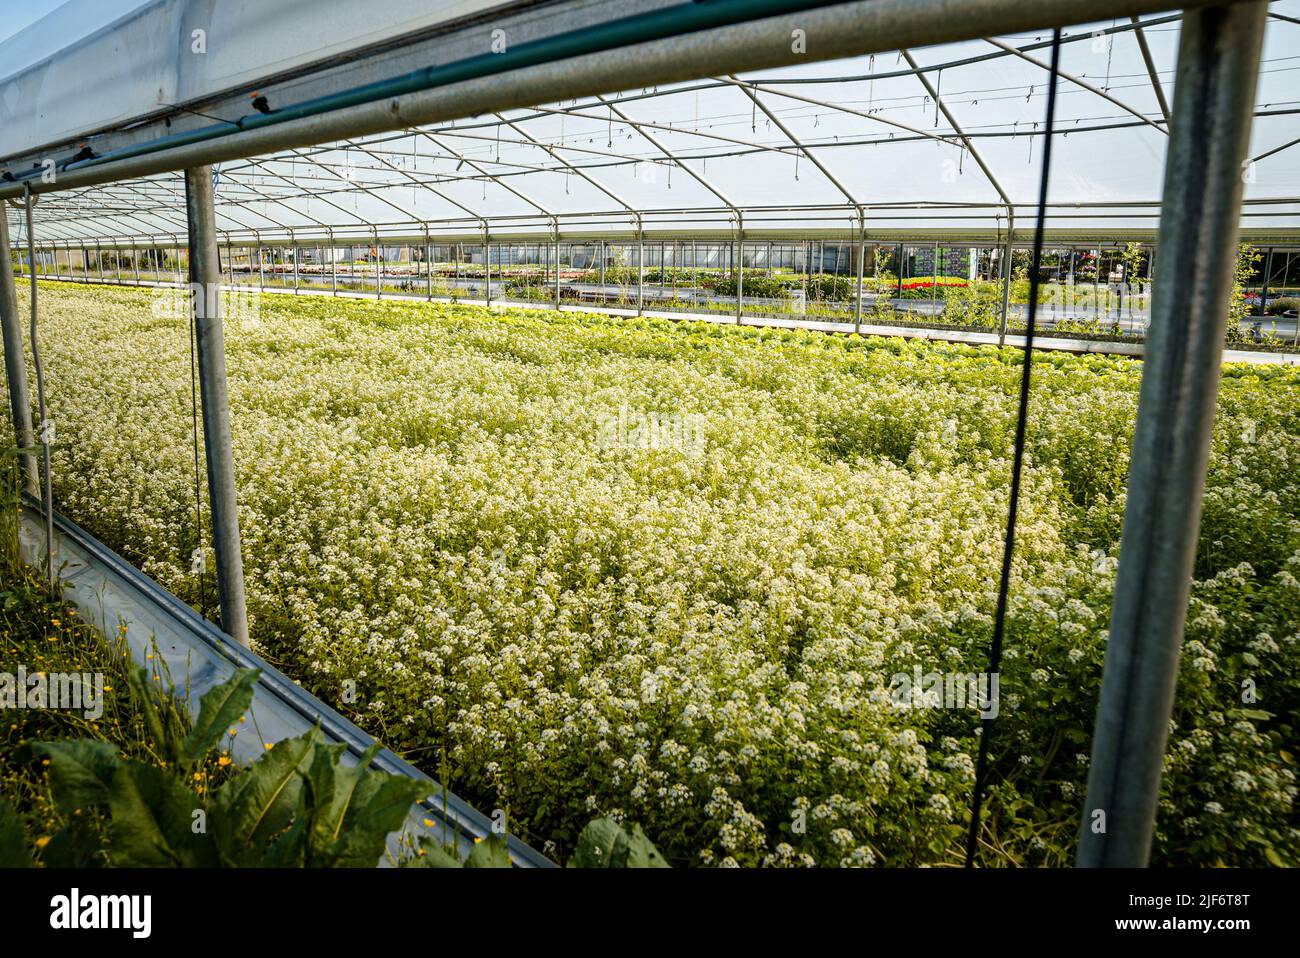 Greenhouse with growing biological flowers and plants. Glasshouse Stock Photo